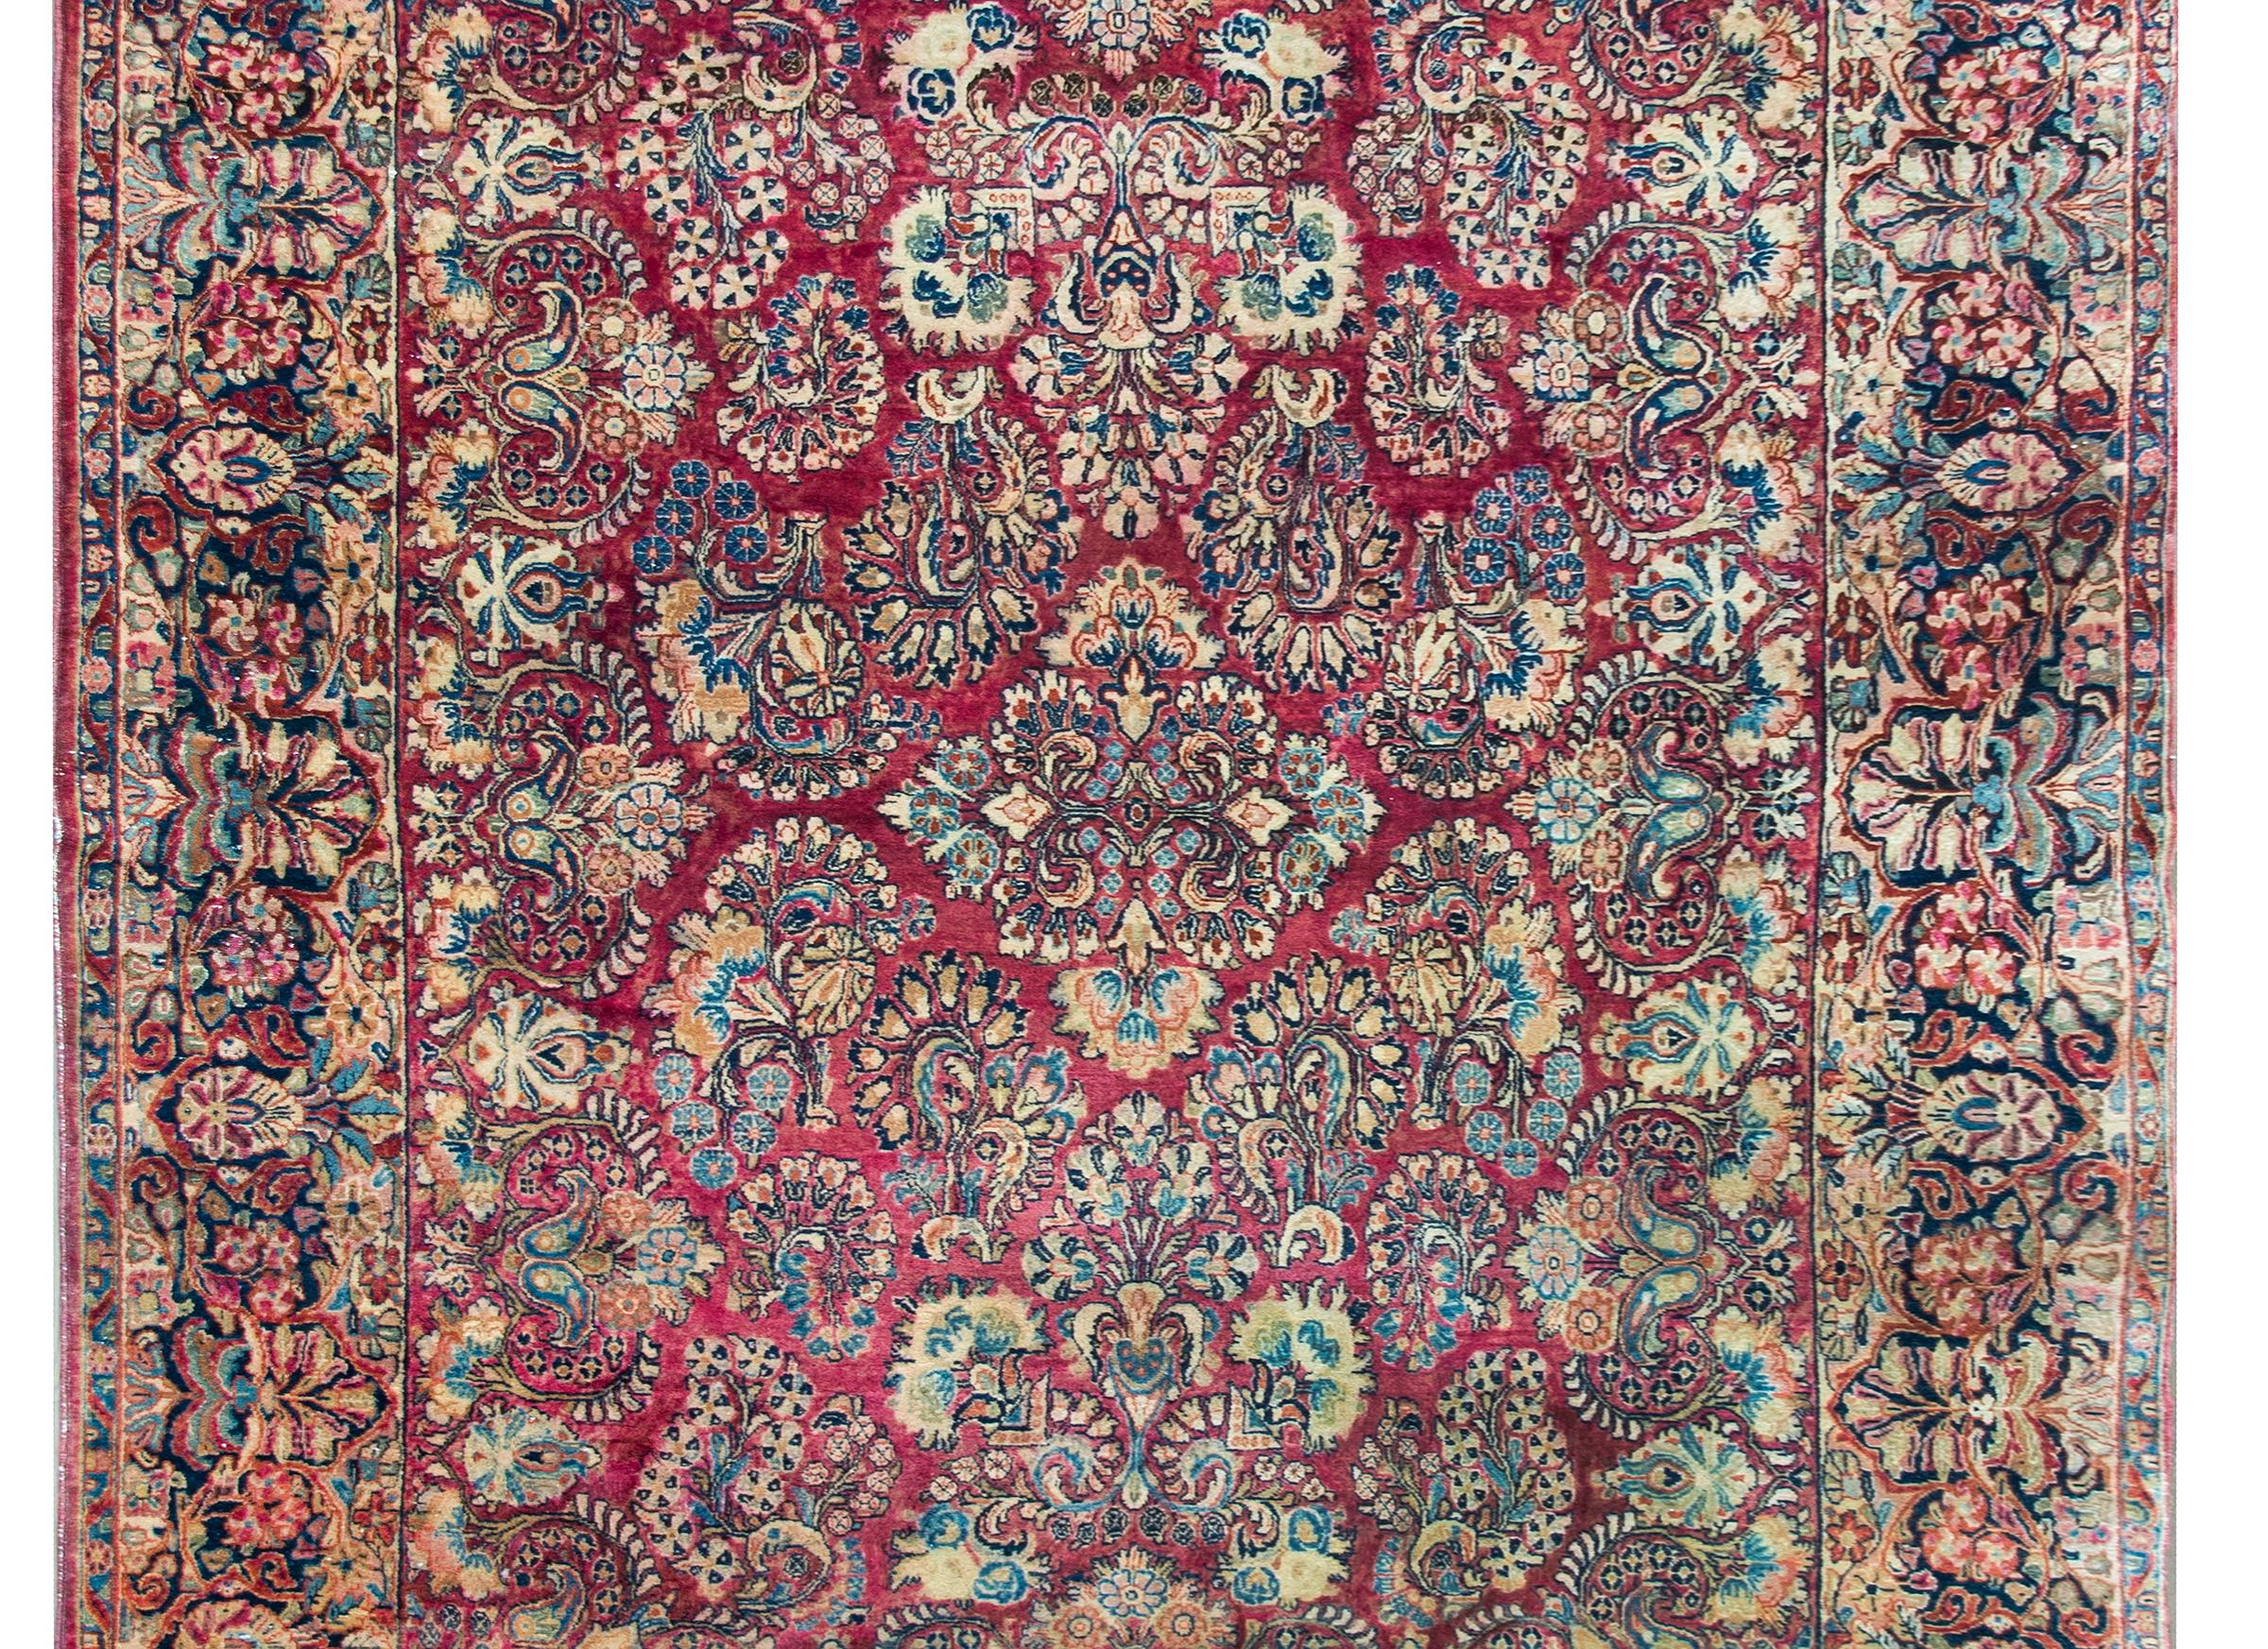 A beautiful early 20th century Persian Sarouk rug with an all-over large-scale mirrored floral cluster pattern with myriad flowers and leaves woven in tradition, Sarouk colors of light and dark indigo, cream, and pink set against a cranberry colored